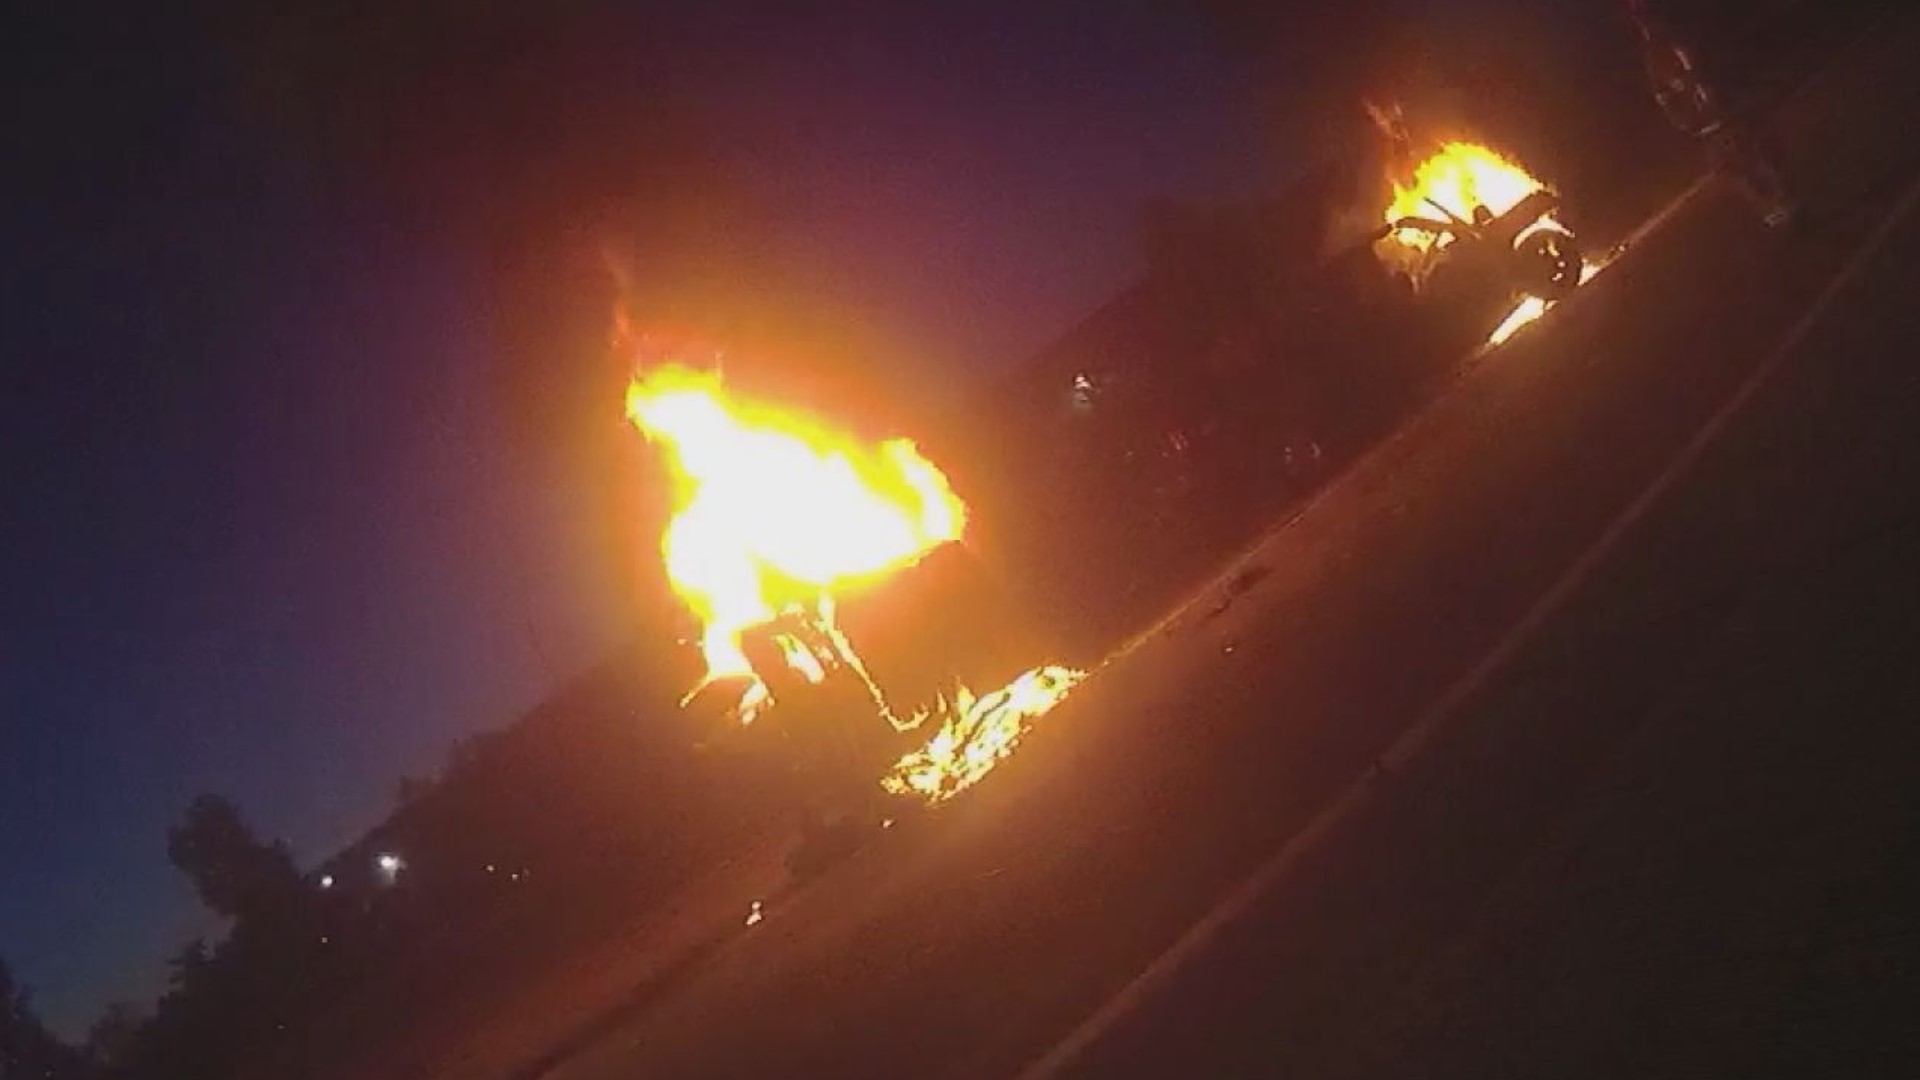 Two cars were engulfed in flames when officers arrived, both drivers unresponsive.